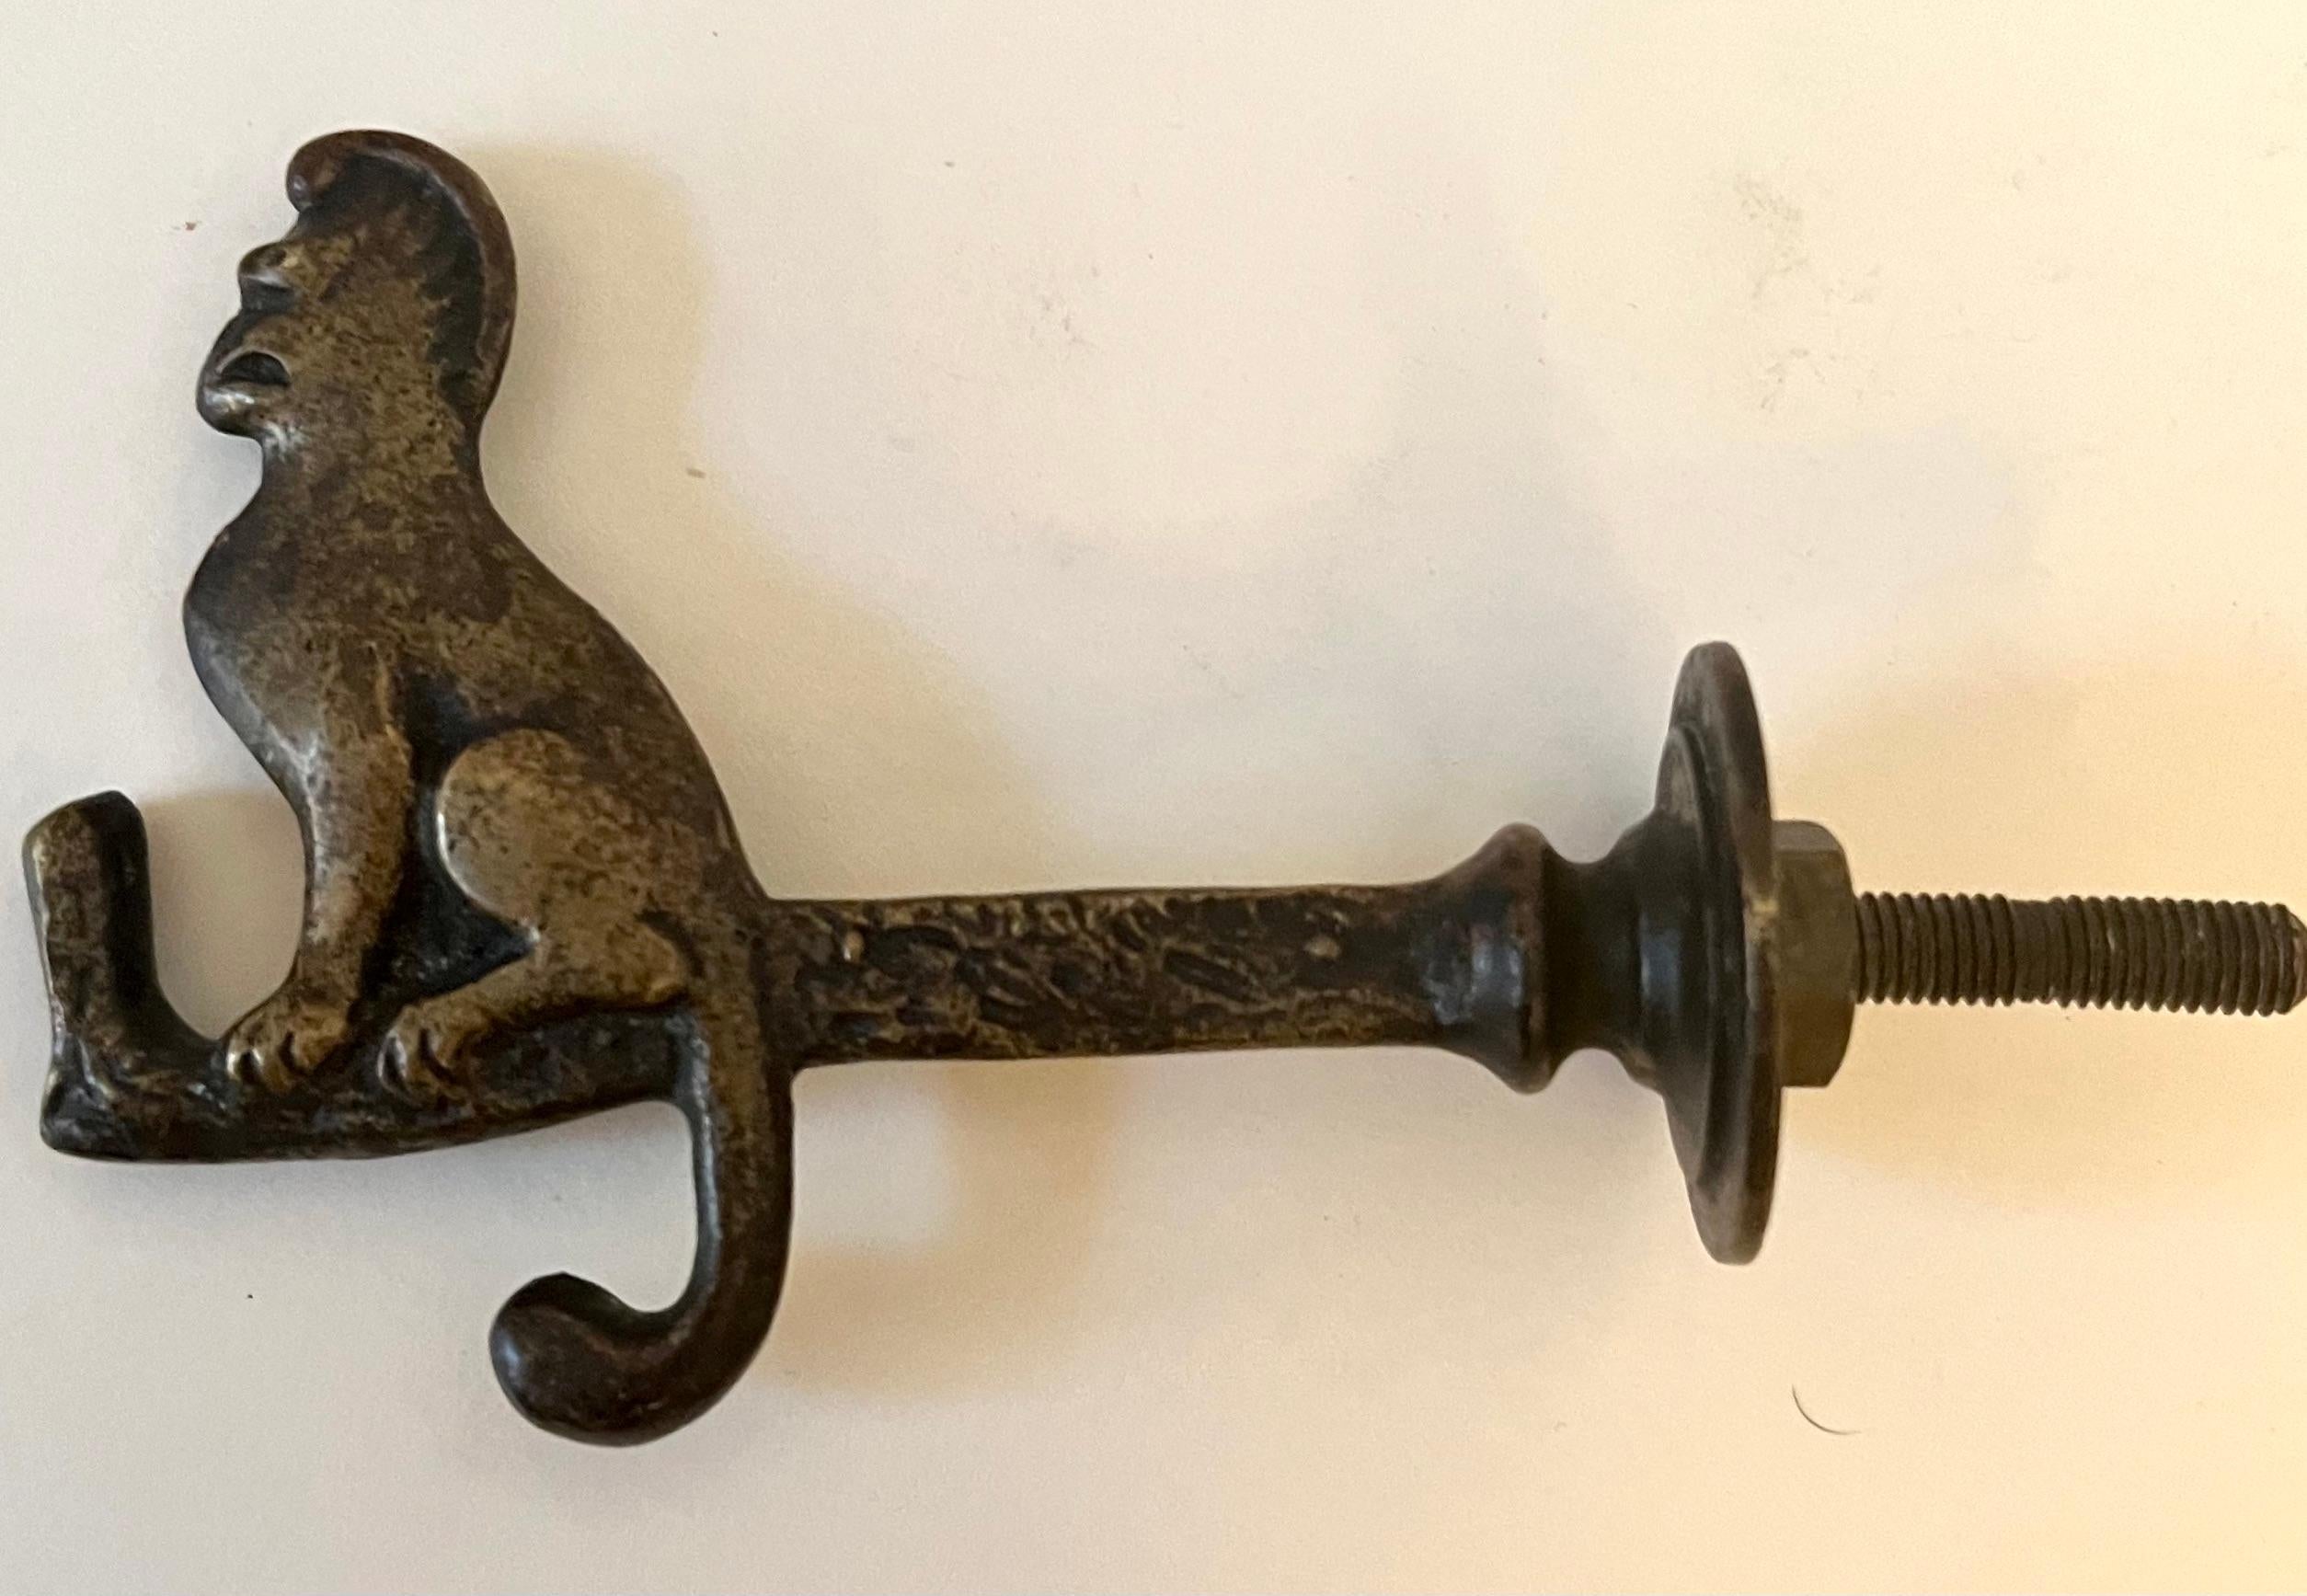 A solid brass door hook with a monkey on the end.  

A whimsical expression for many spaces - great for the back of a door, in a kitchen to hold bags or in a Childs room.

Very cute and functional as well.